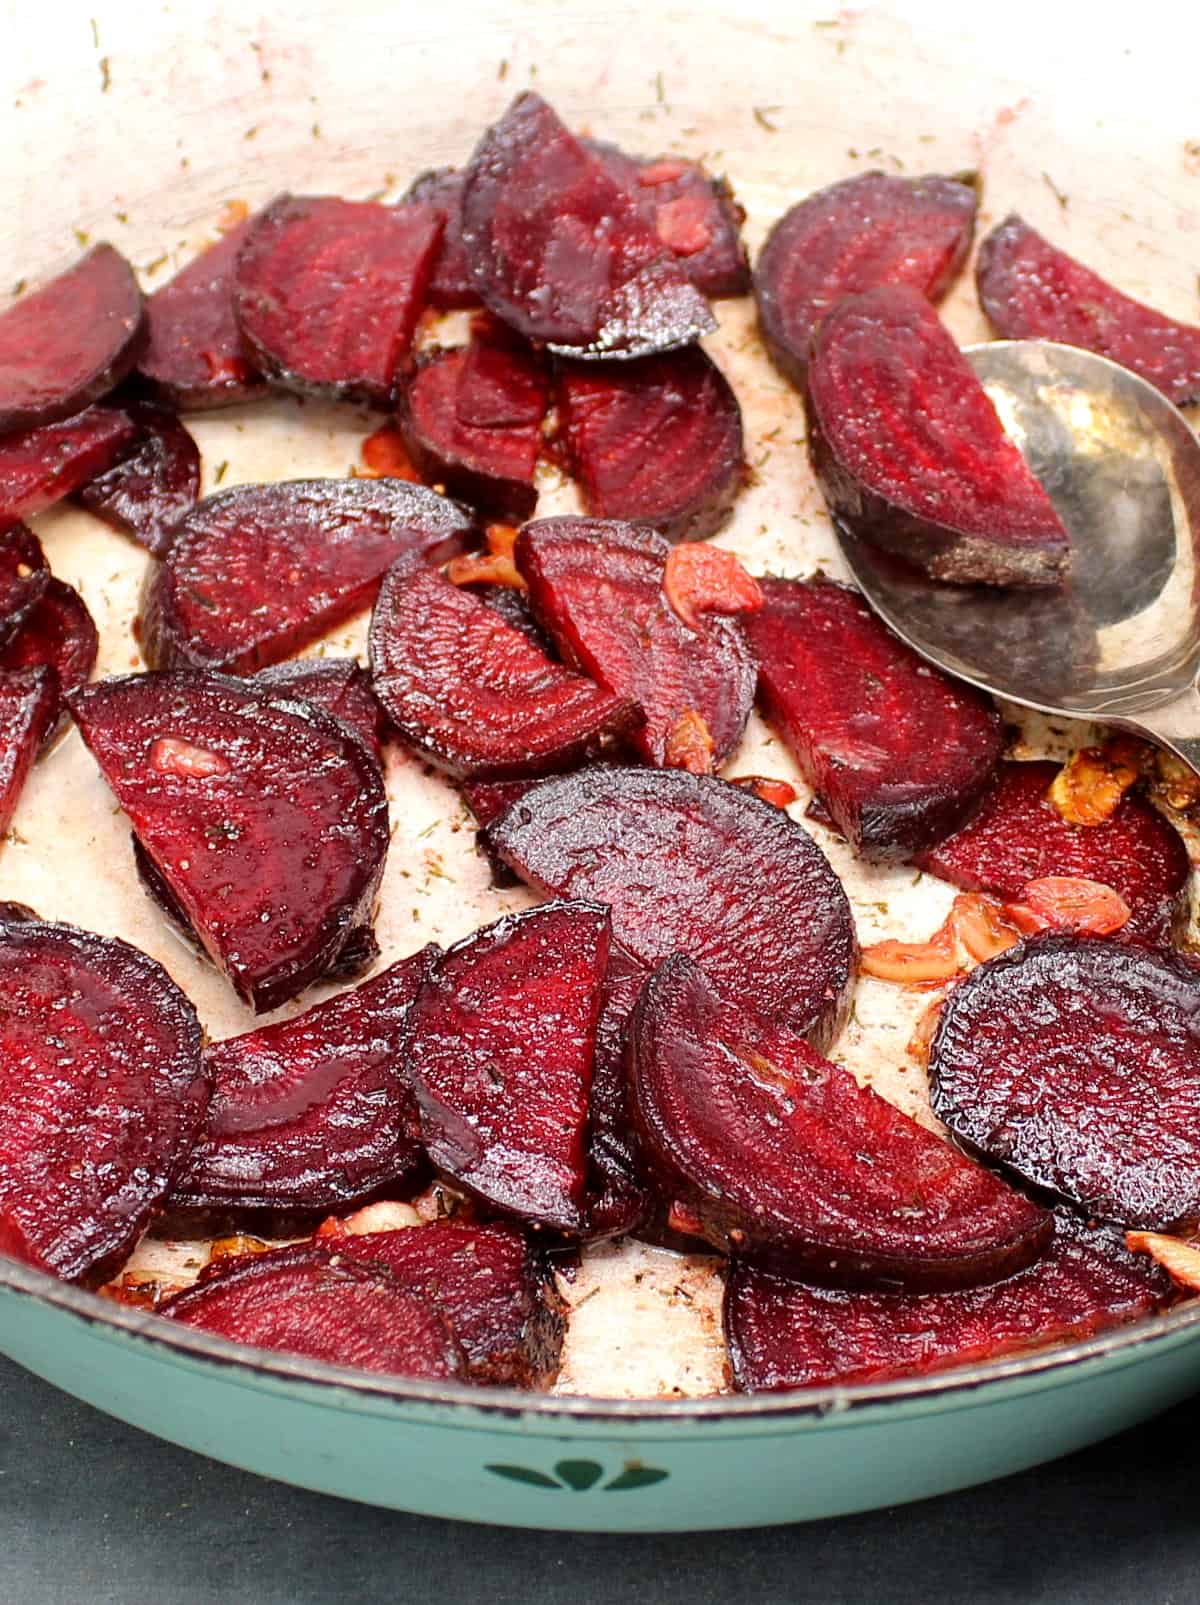 Close up of slices of deep red beetroot tossed with garlic and butter in a skillet.